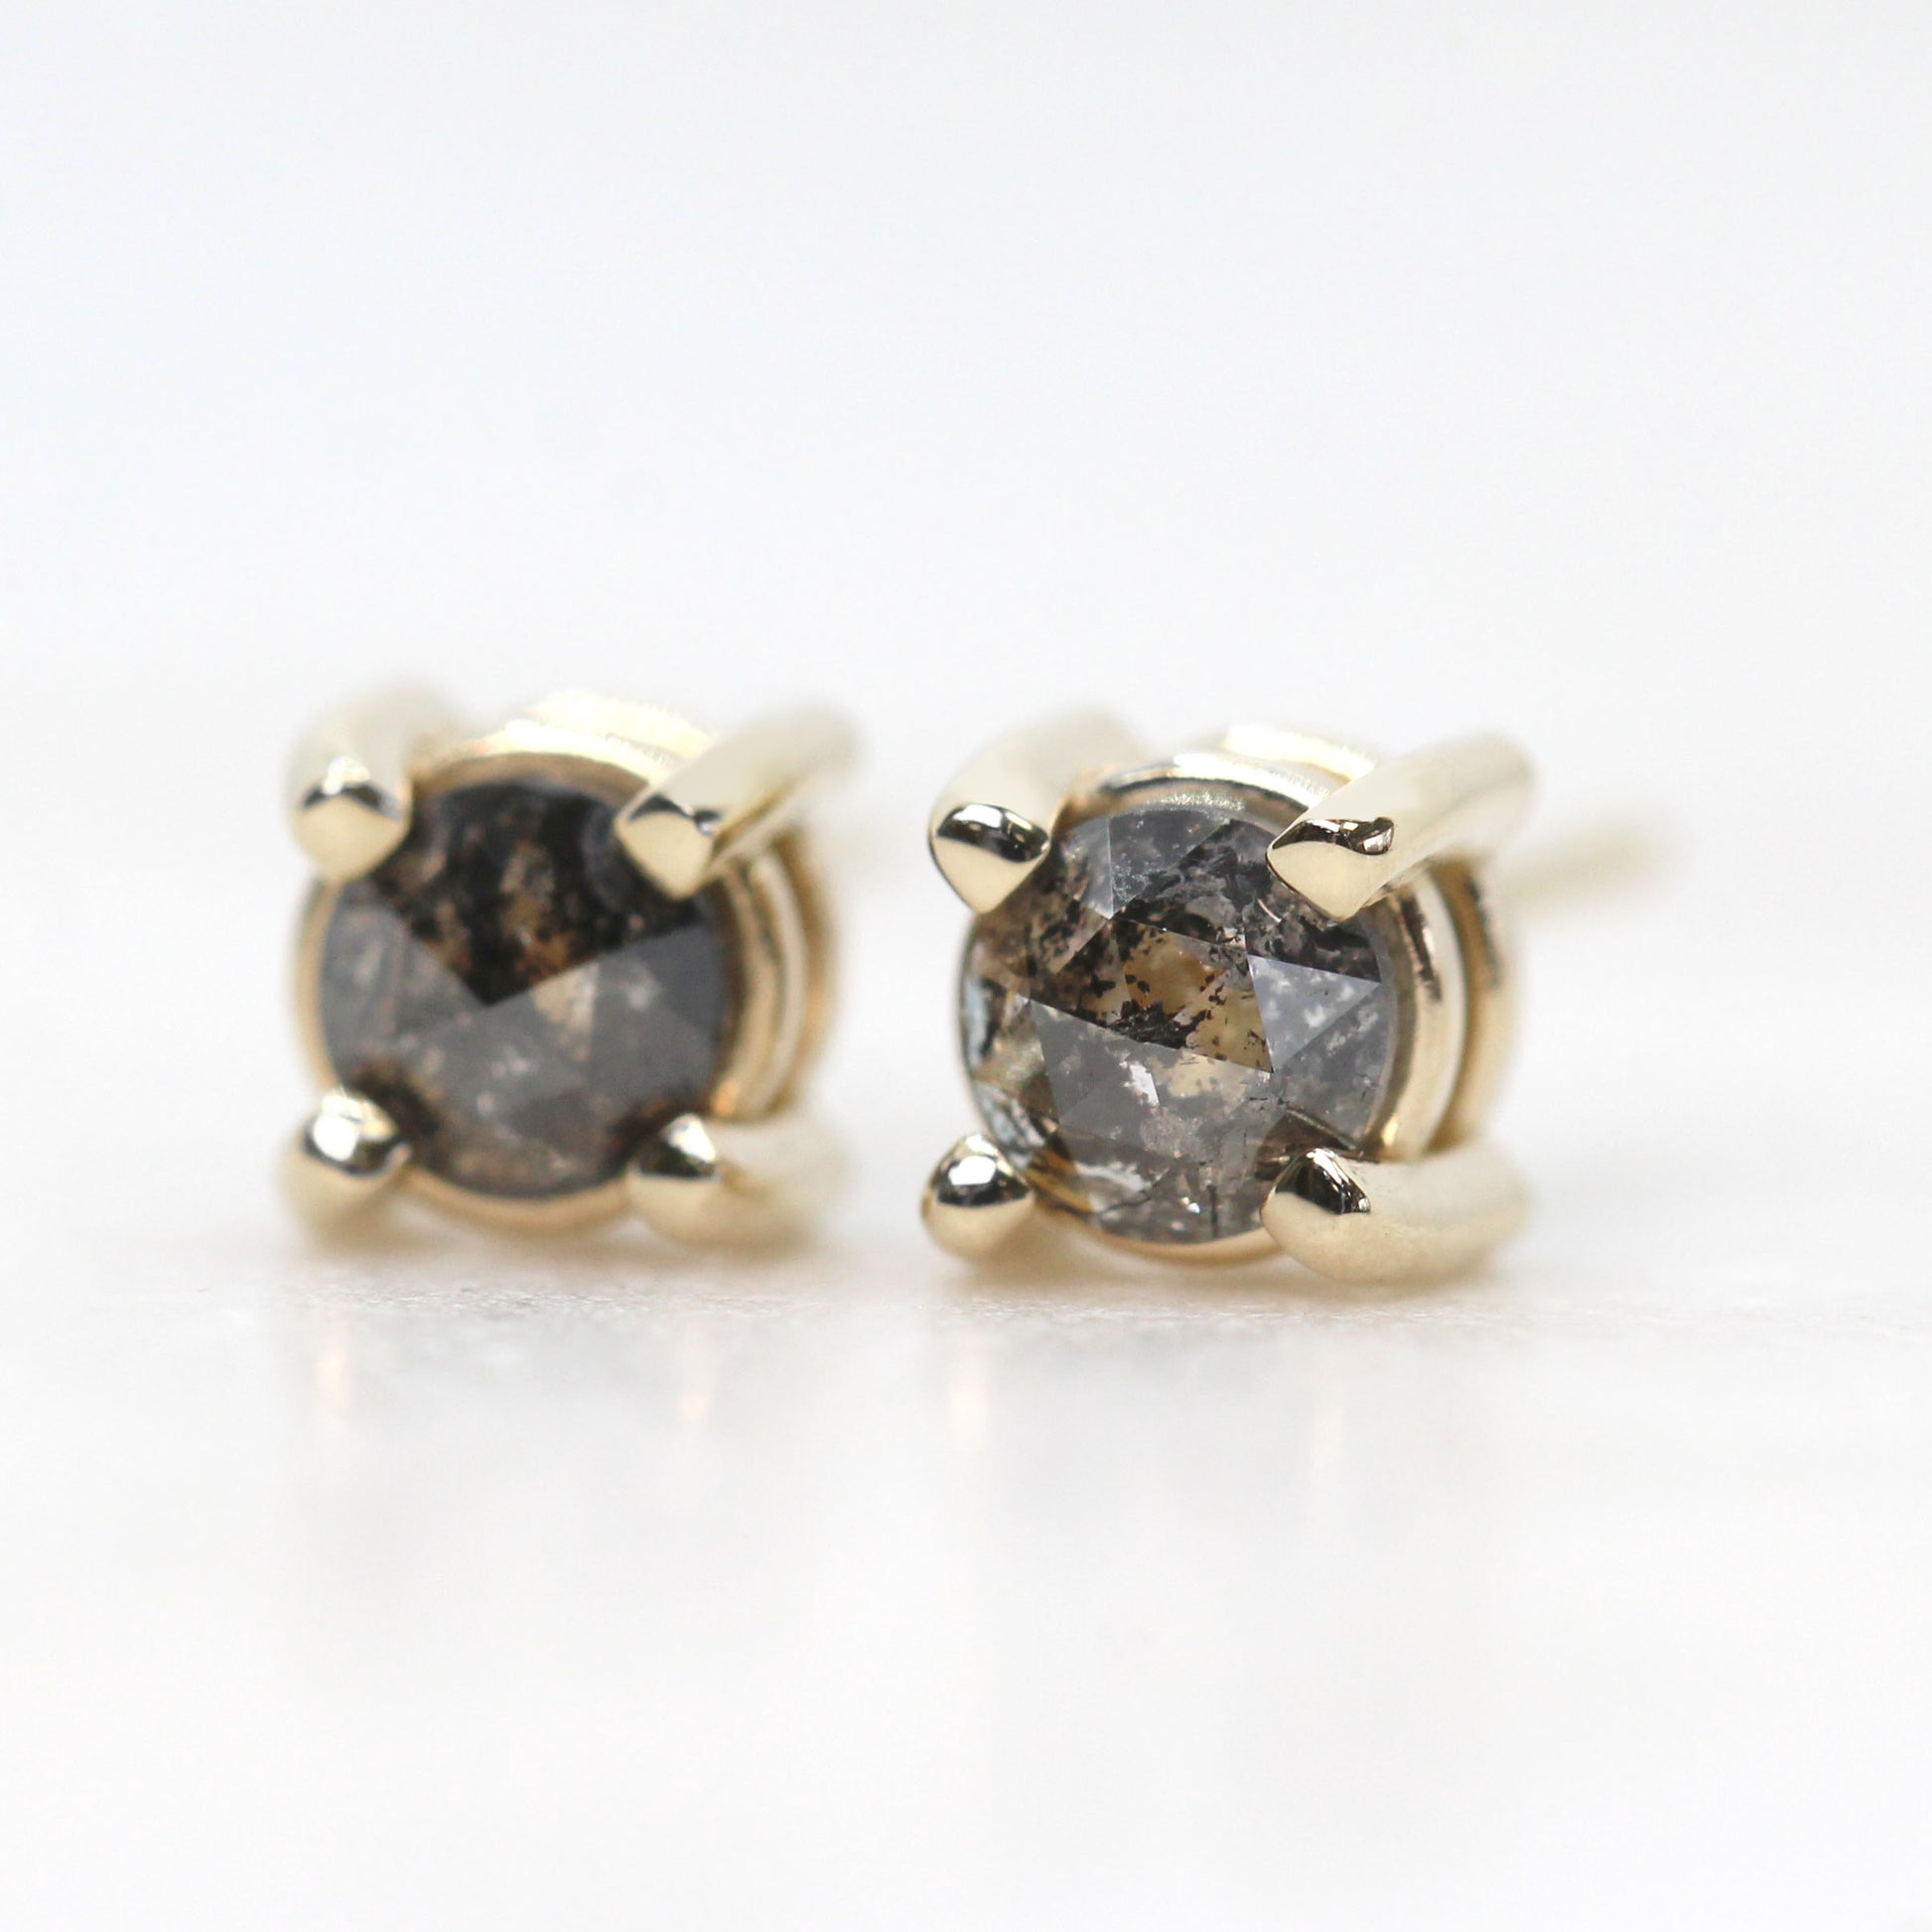 Rose Cut 3.8mm Dark Charcoal Gray Celestial Diamond Earring Studs in 14k Yellow Gold - Ready to Ship - Midwinter Co. Alternative Bridal Rings and Modern Fine Jewelry